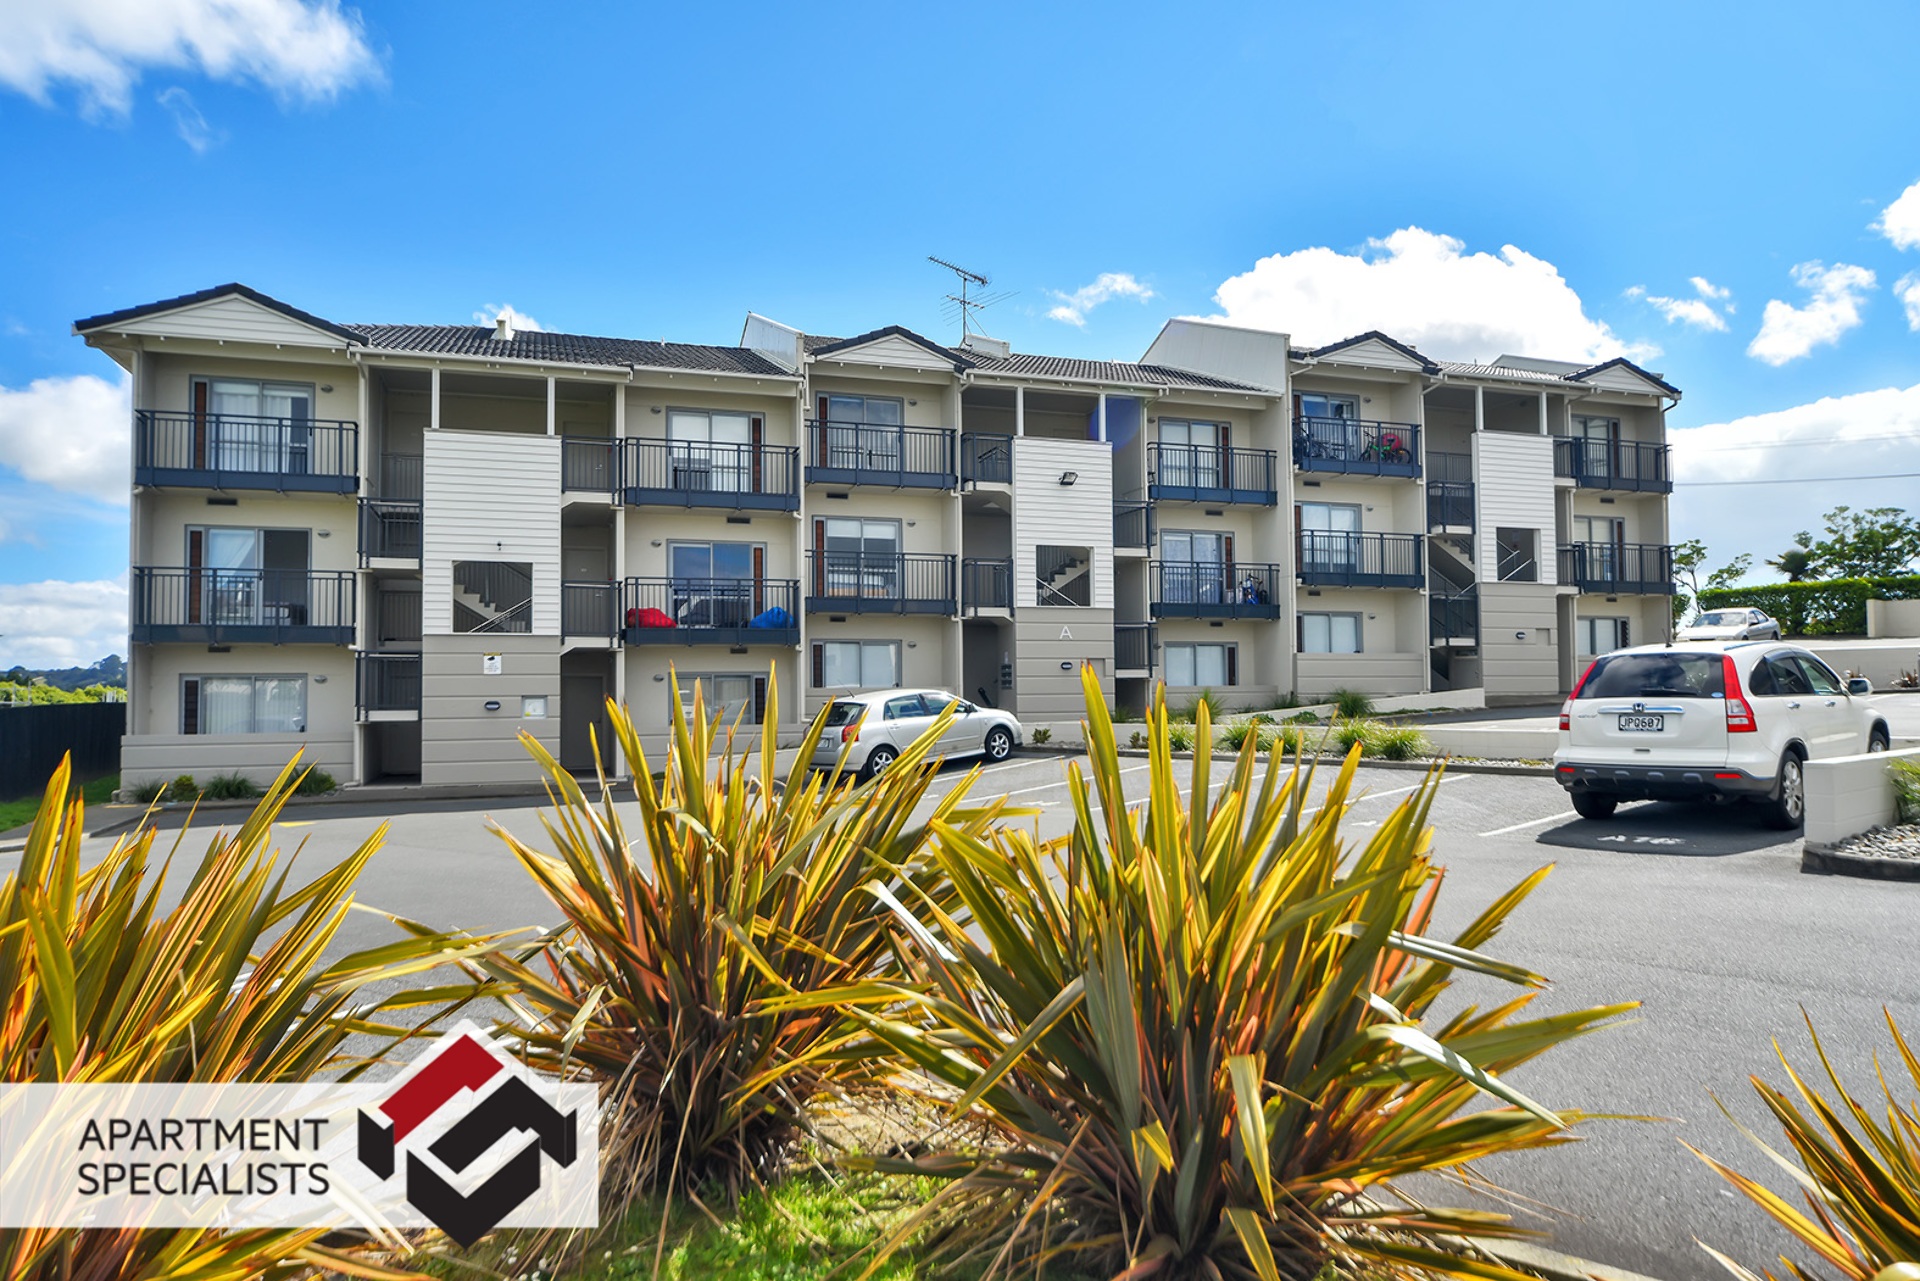 9 | 71 Spencer Road, Albany | Apartment Specialists